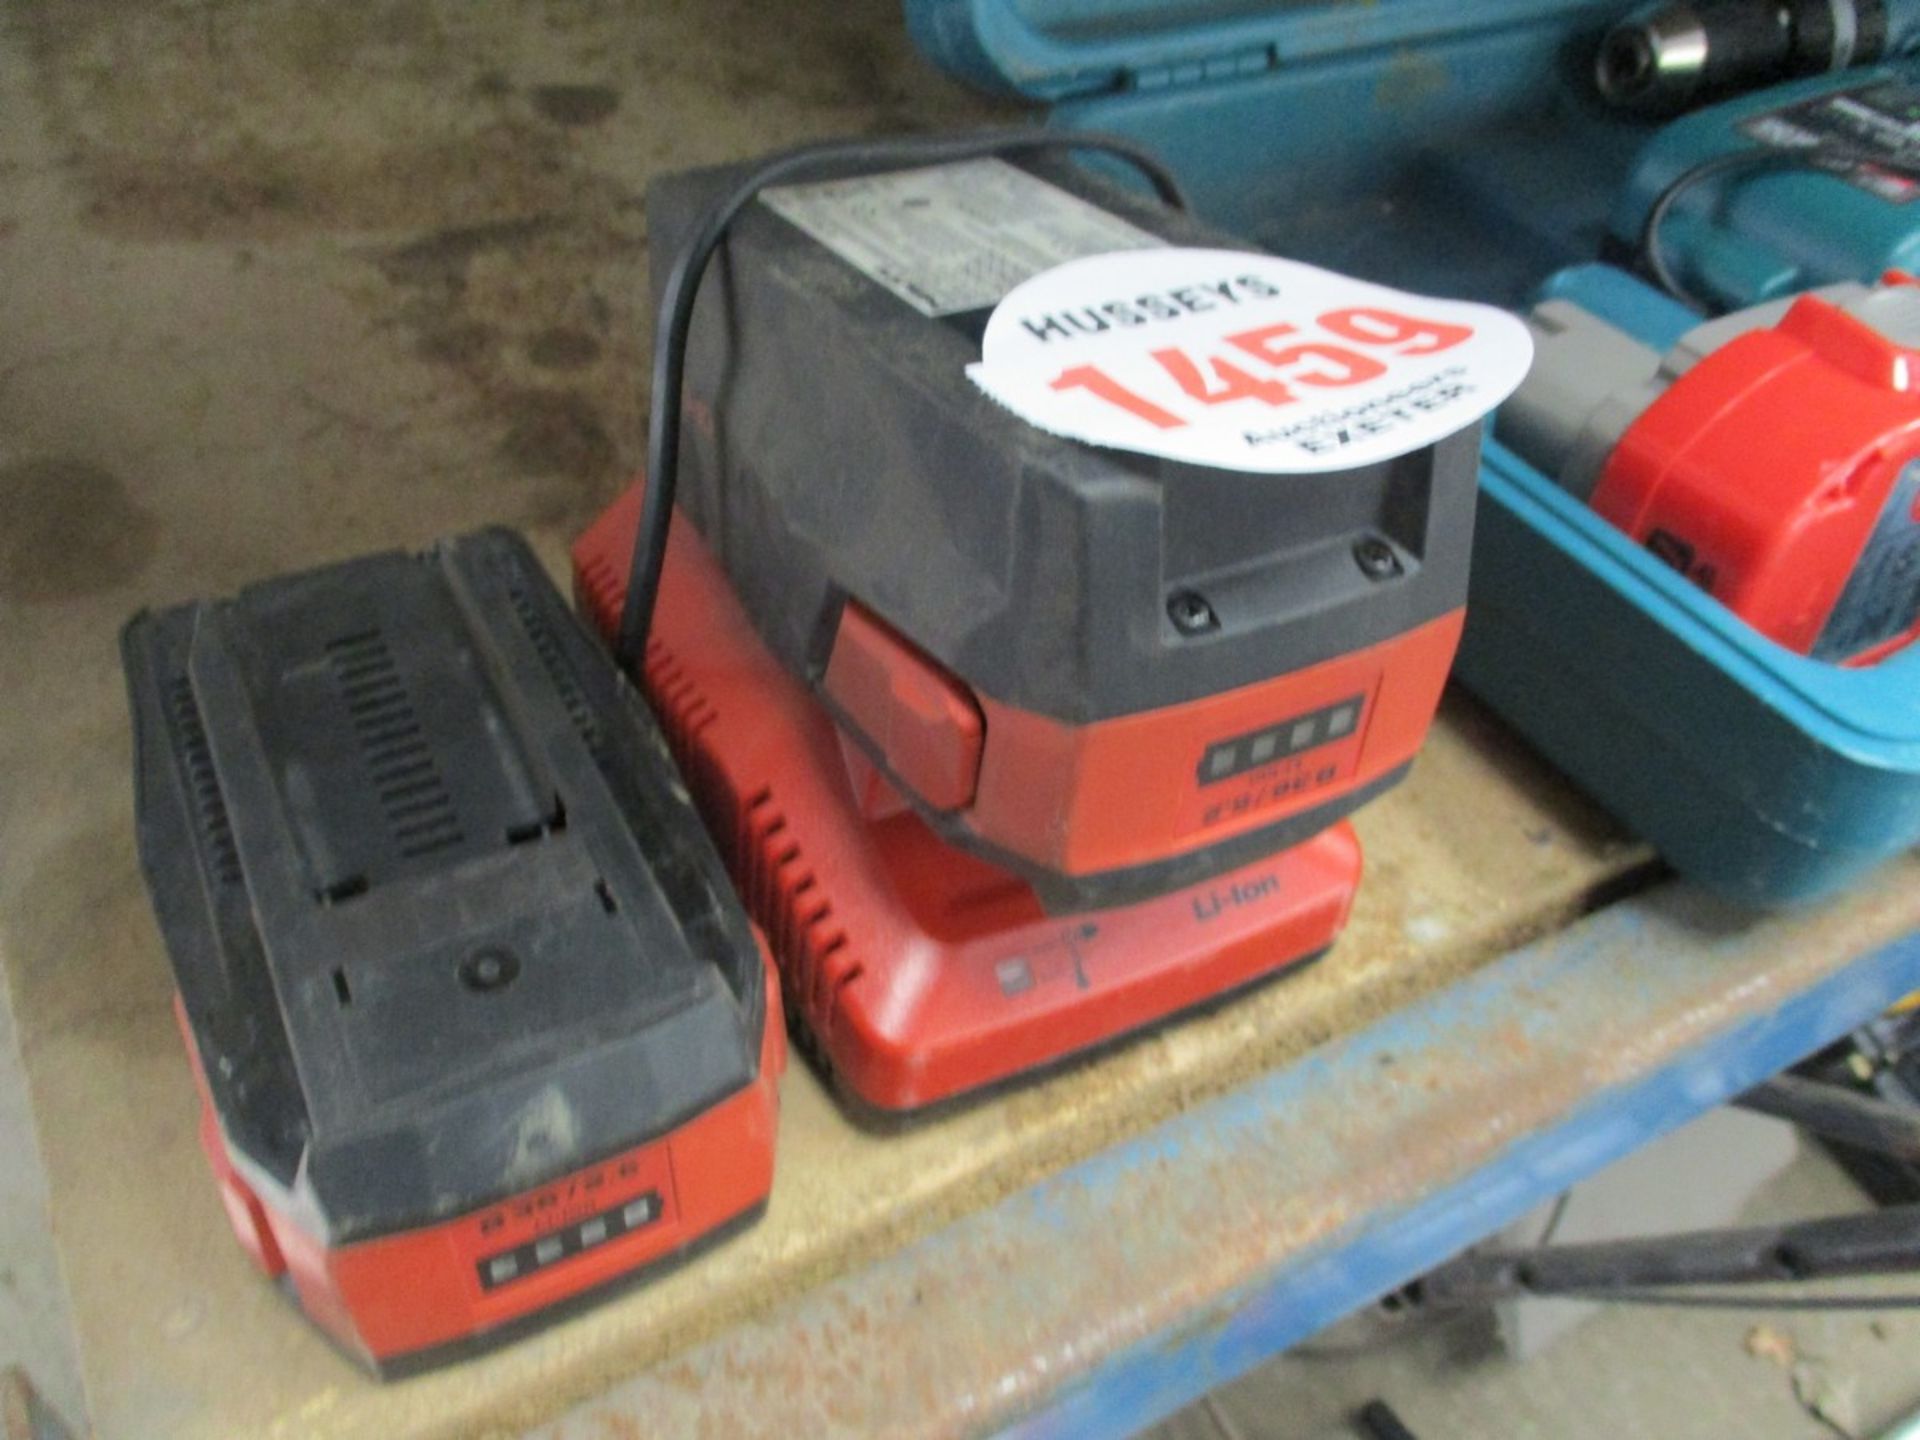 PR OF HILTI BATTERIES C.W CHARGER